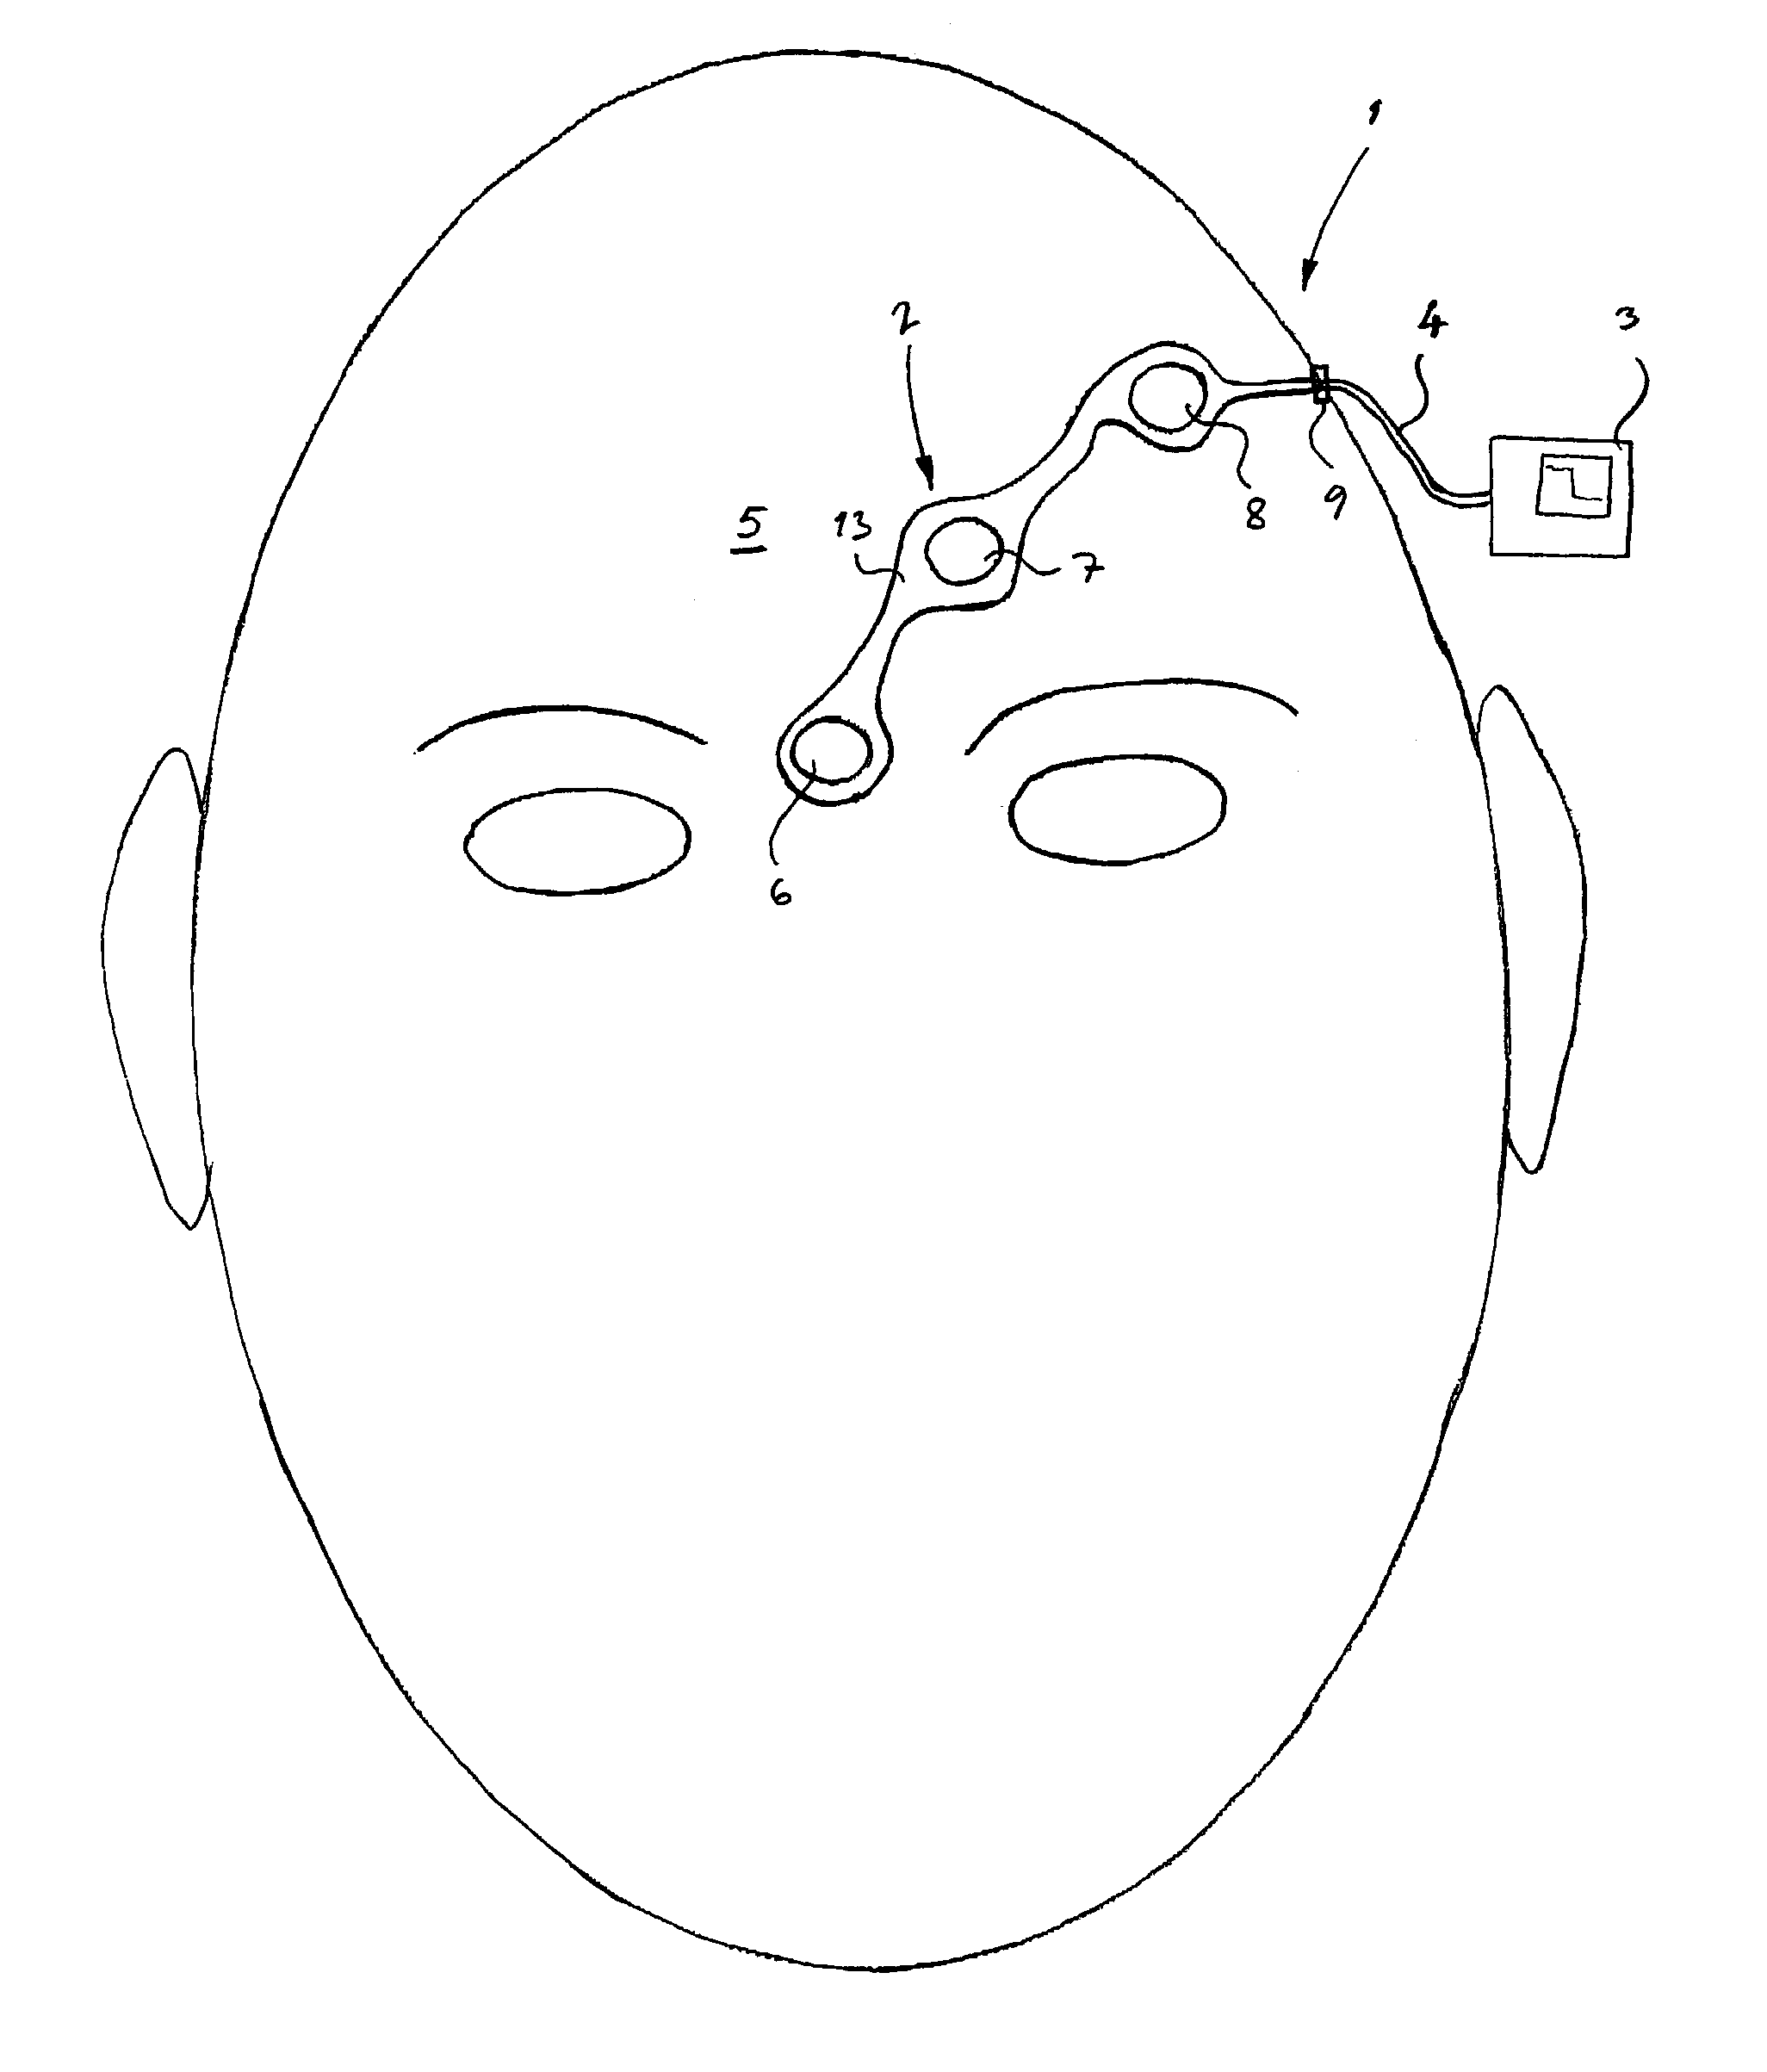 Method of positioning electrodes for central nervous system monitoring and sensing pain reactions of a patient